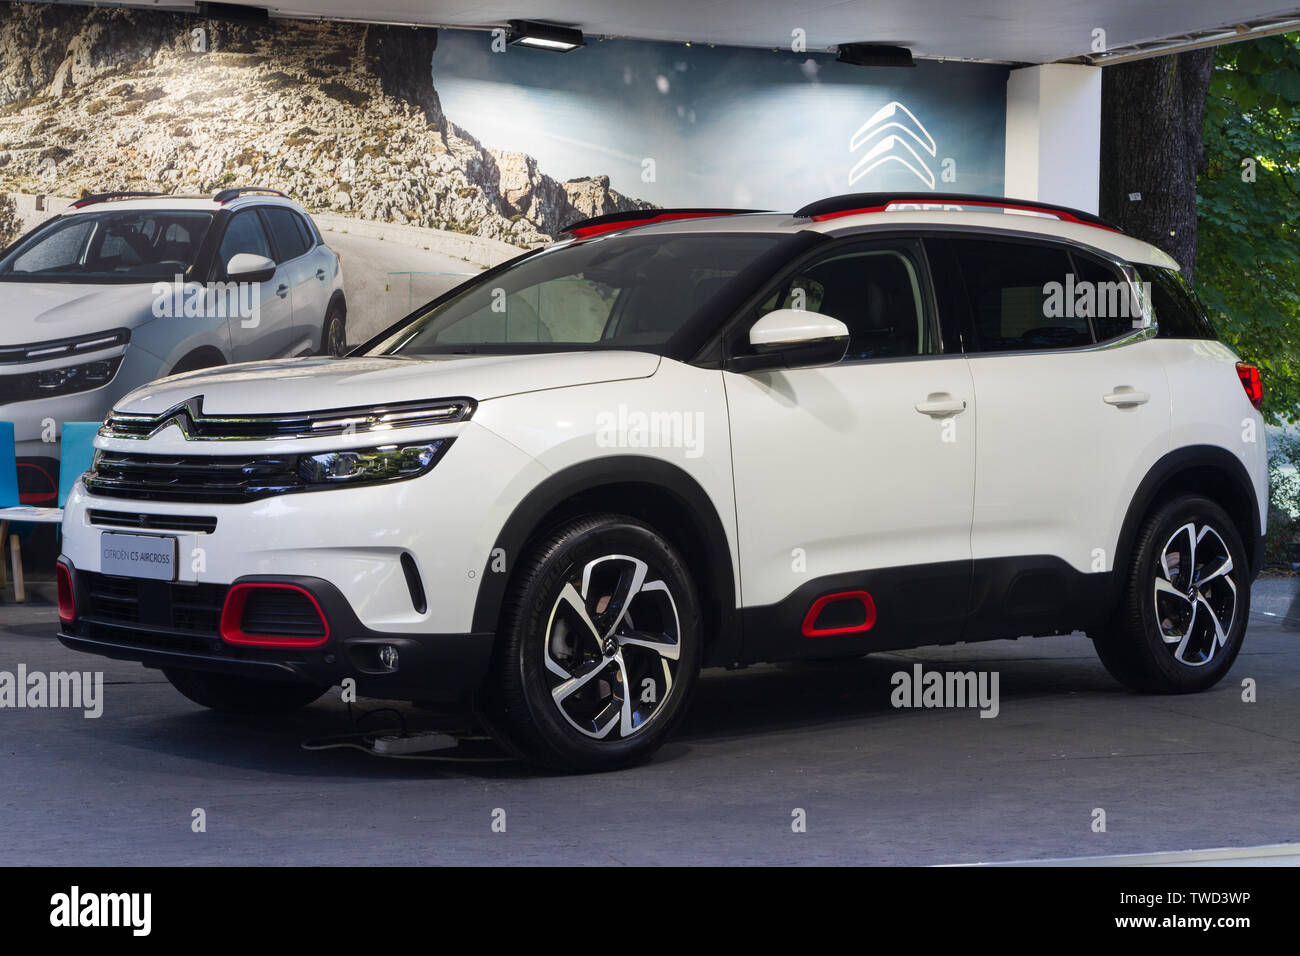 A Citroën C5 Aircross. 2019 edition of Parco Valentino car show hosts cars by many brands and car designers inside Valentino Park in Torino, Italy. Stock Photo